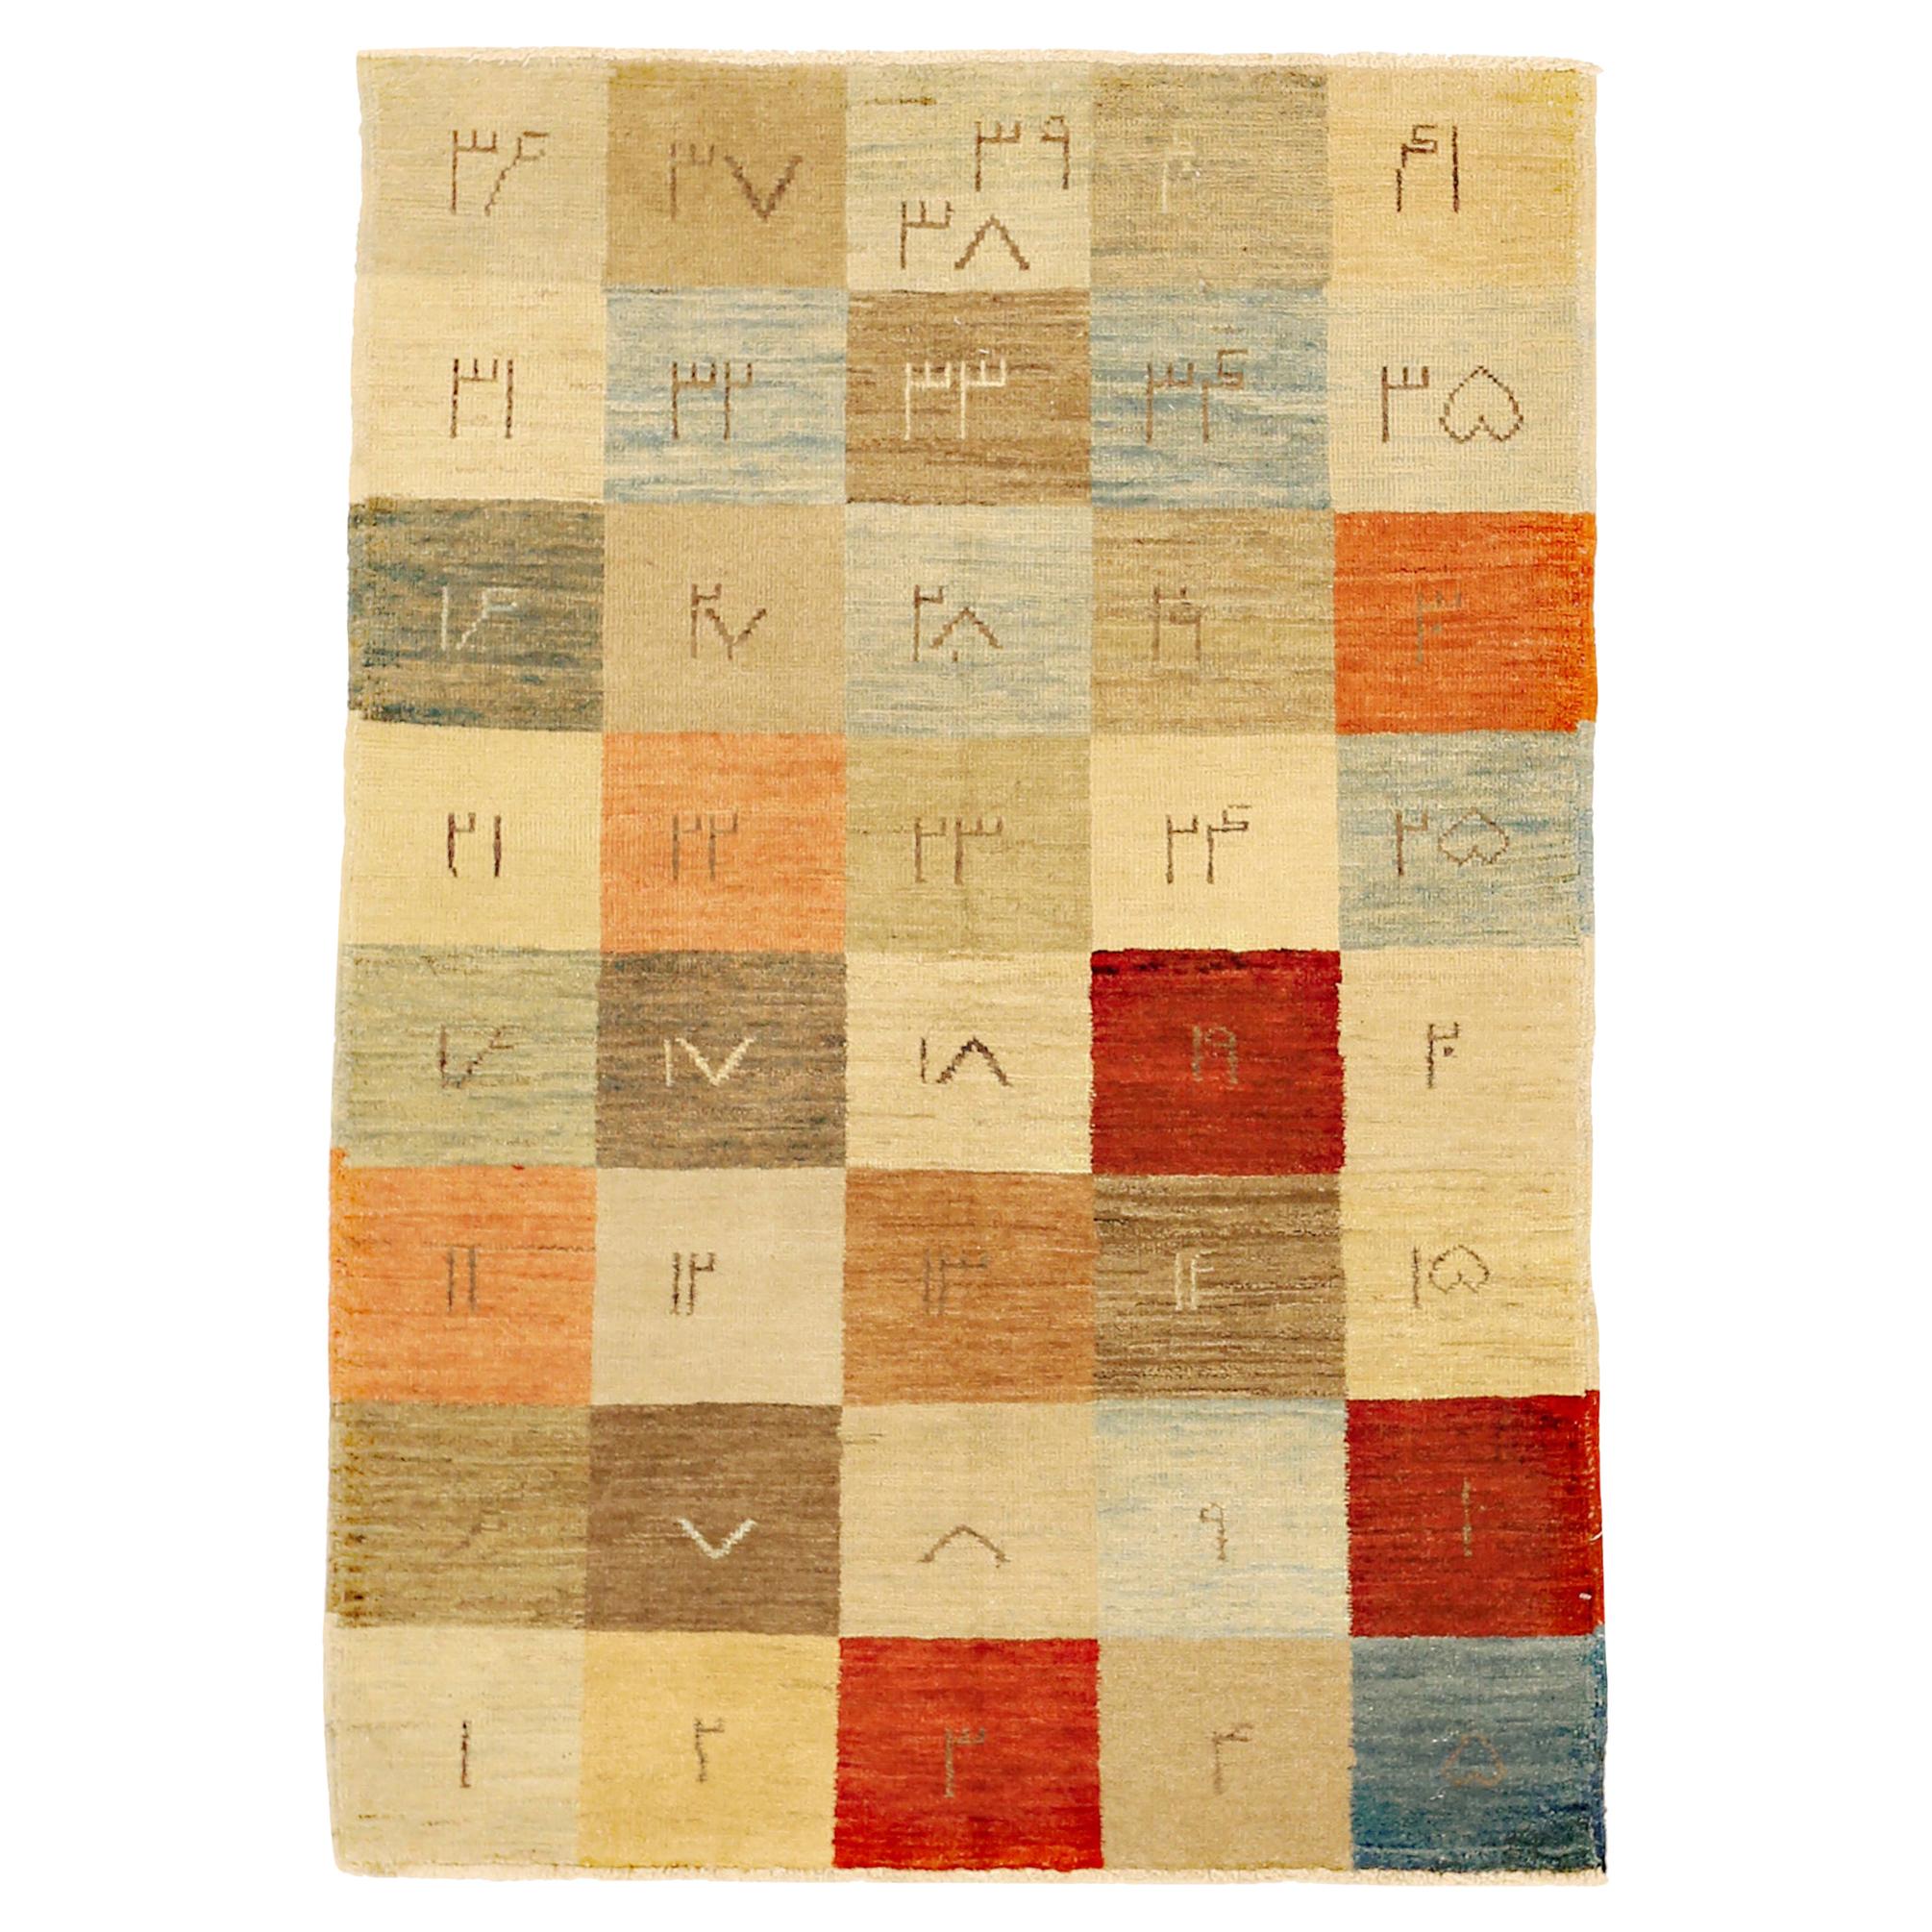 Modern Turkish Rug with Quirky Colored Tiles and Symbols Design